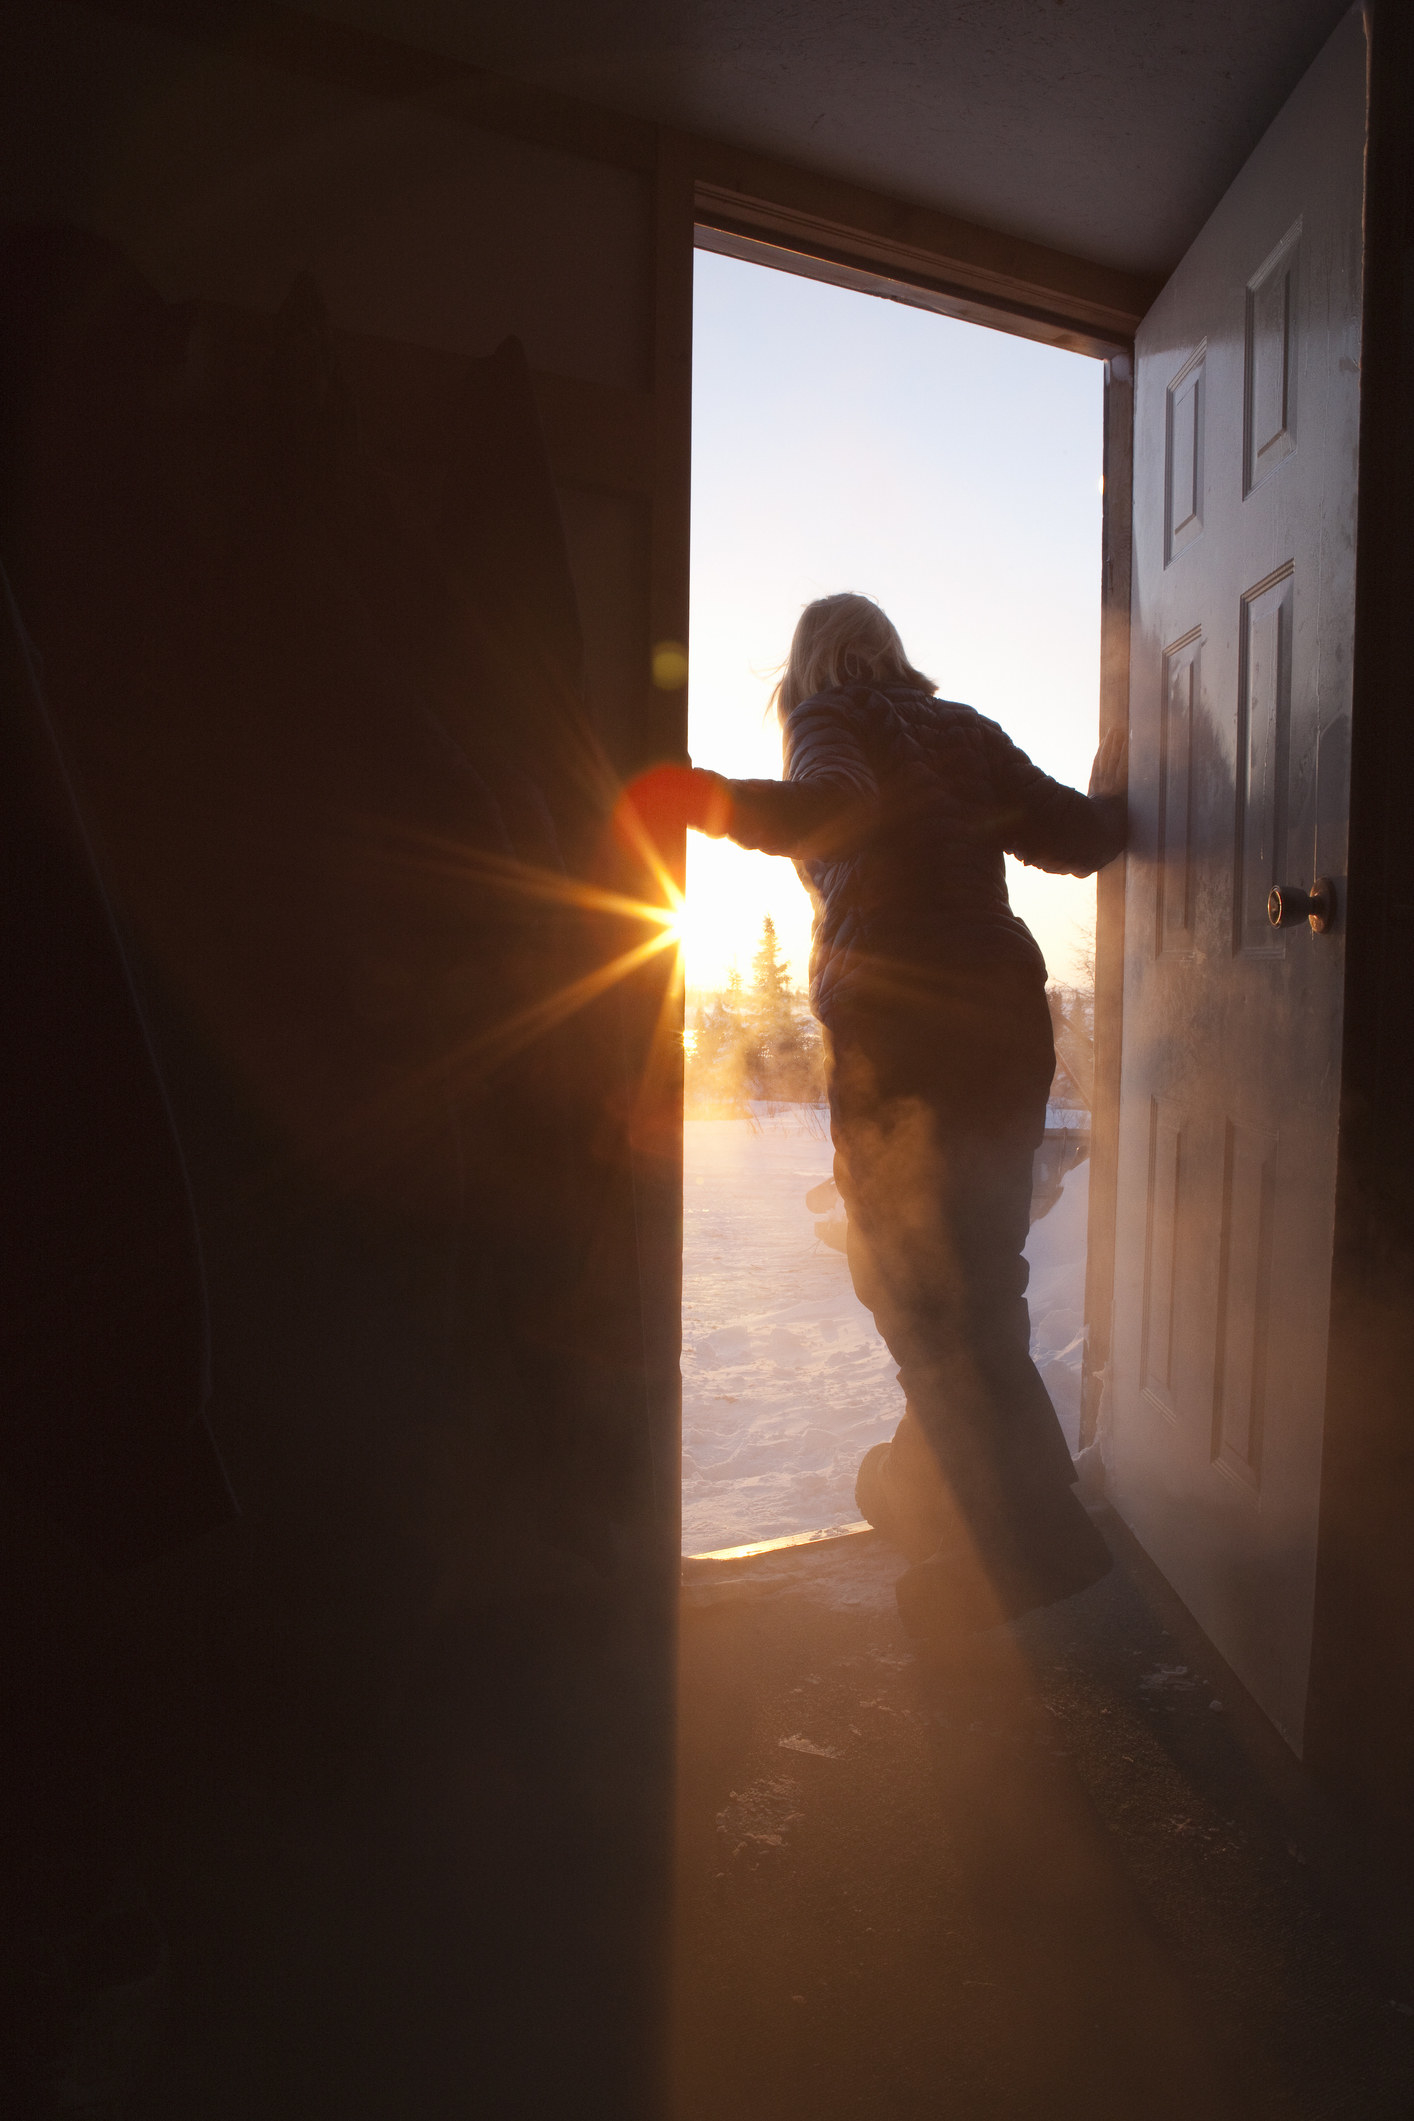 A woman leans out of a door looking into the daylight outside